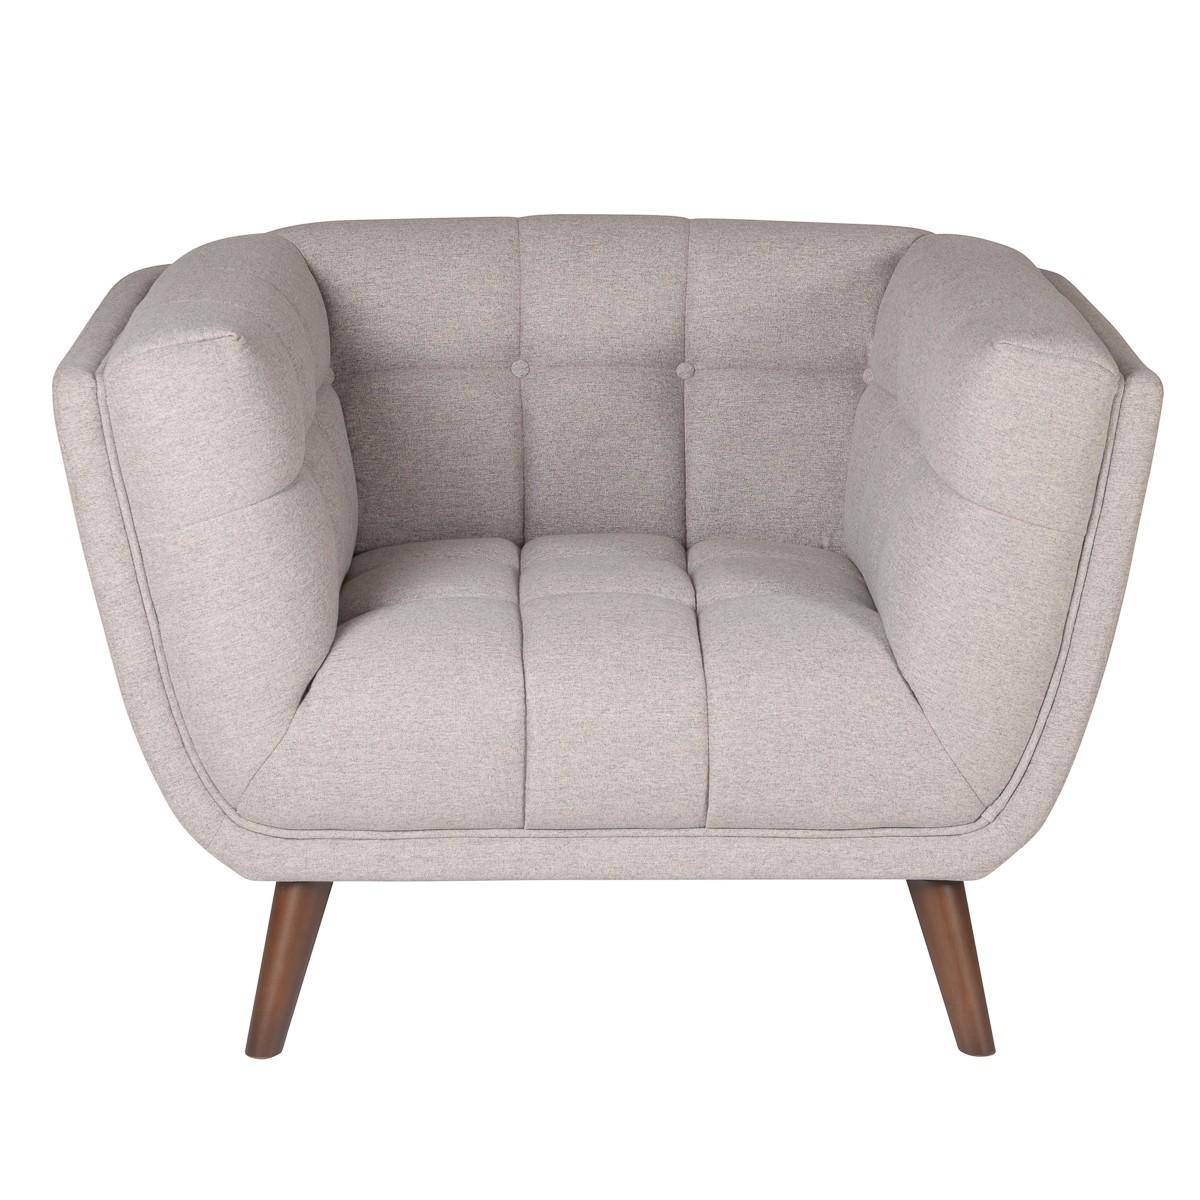 Comfy and elegant armchair dressed in trendy light grey and wooden feet